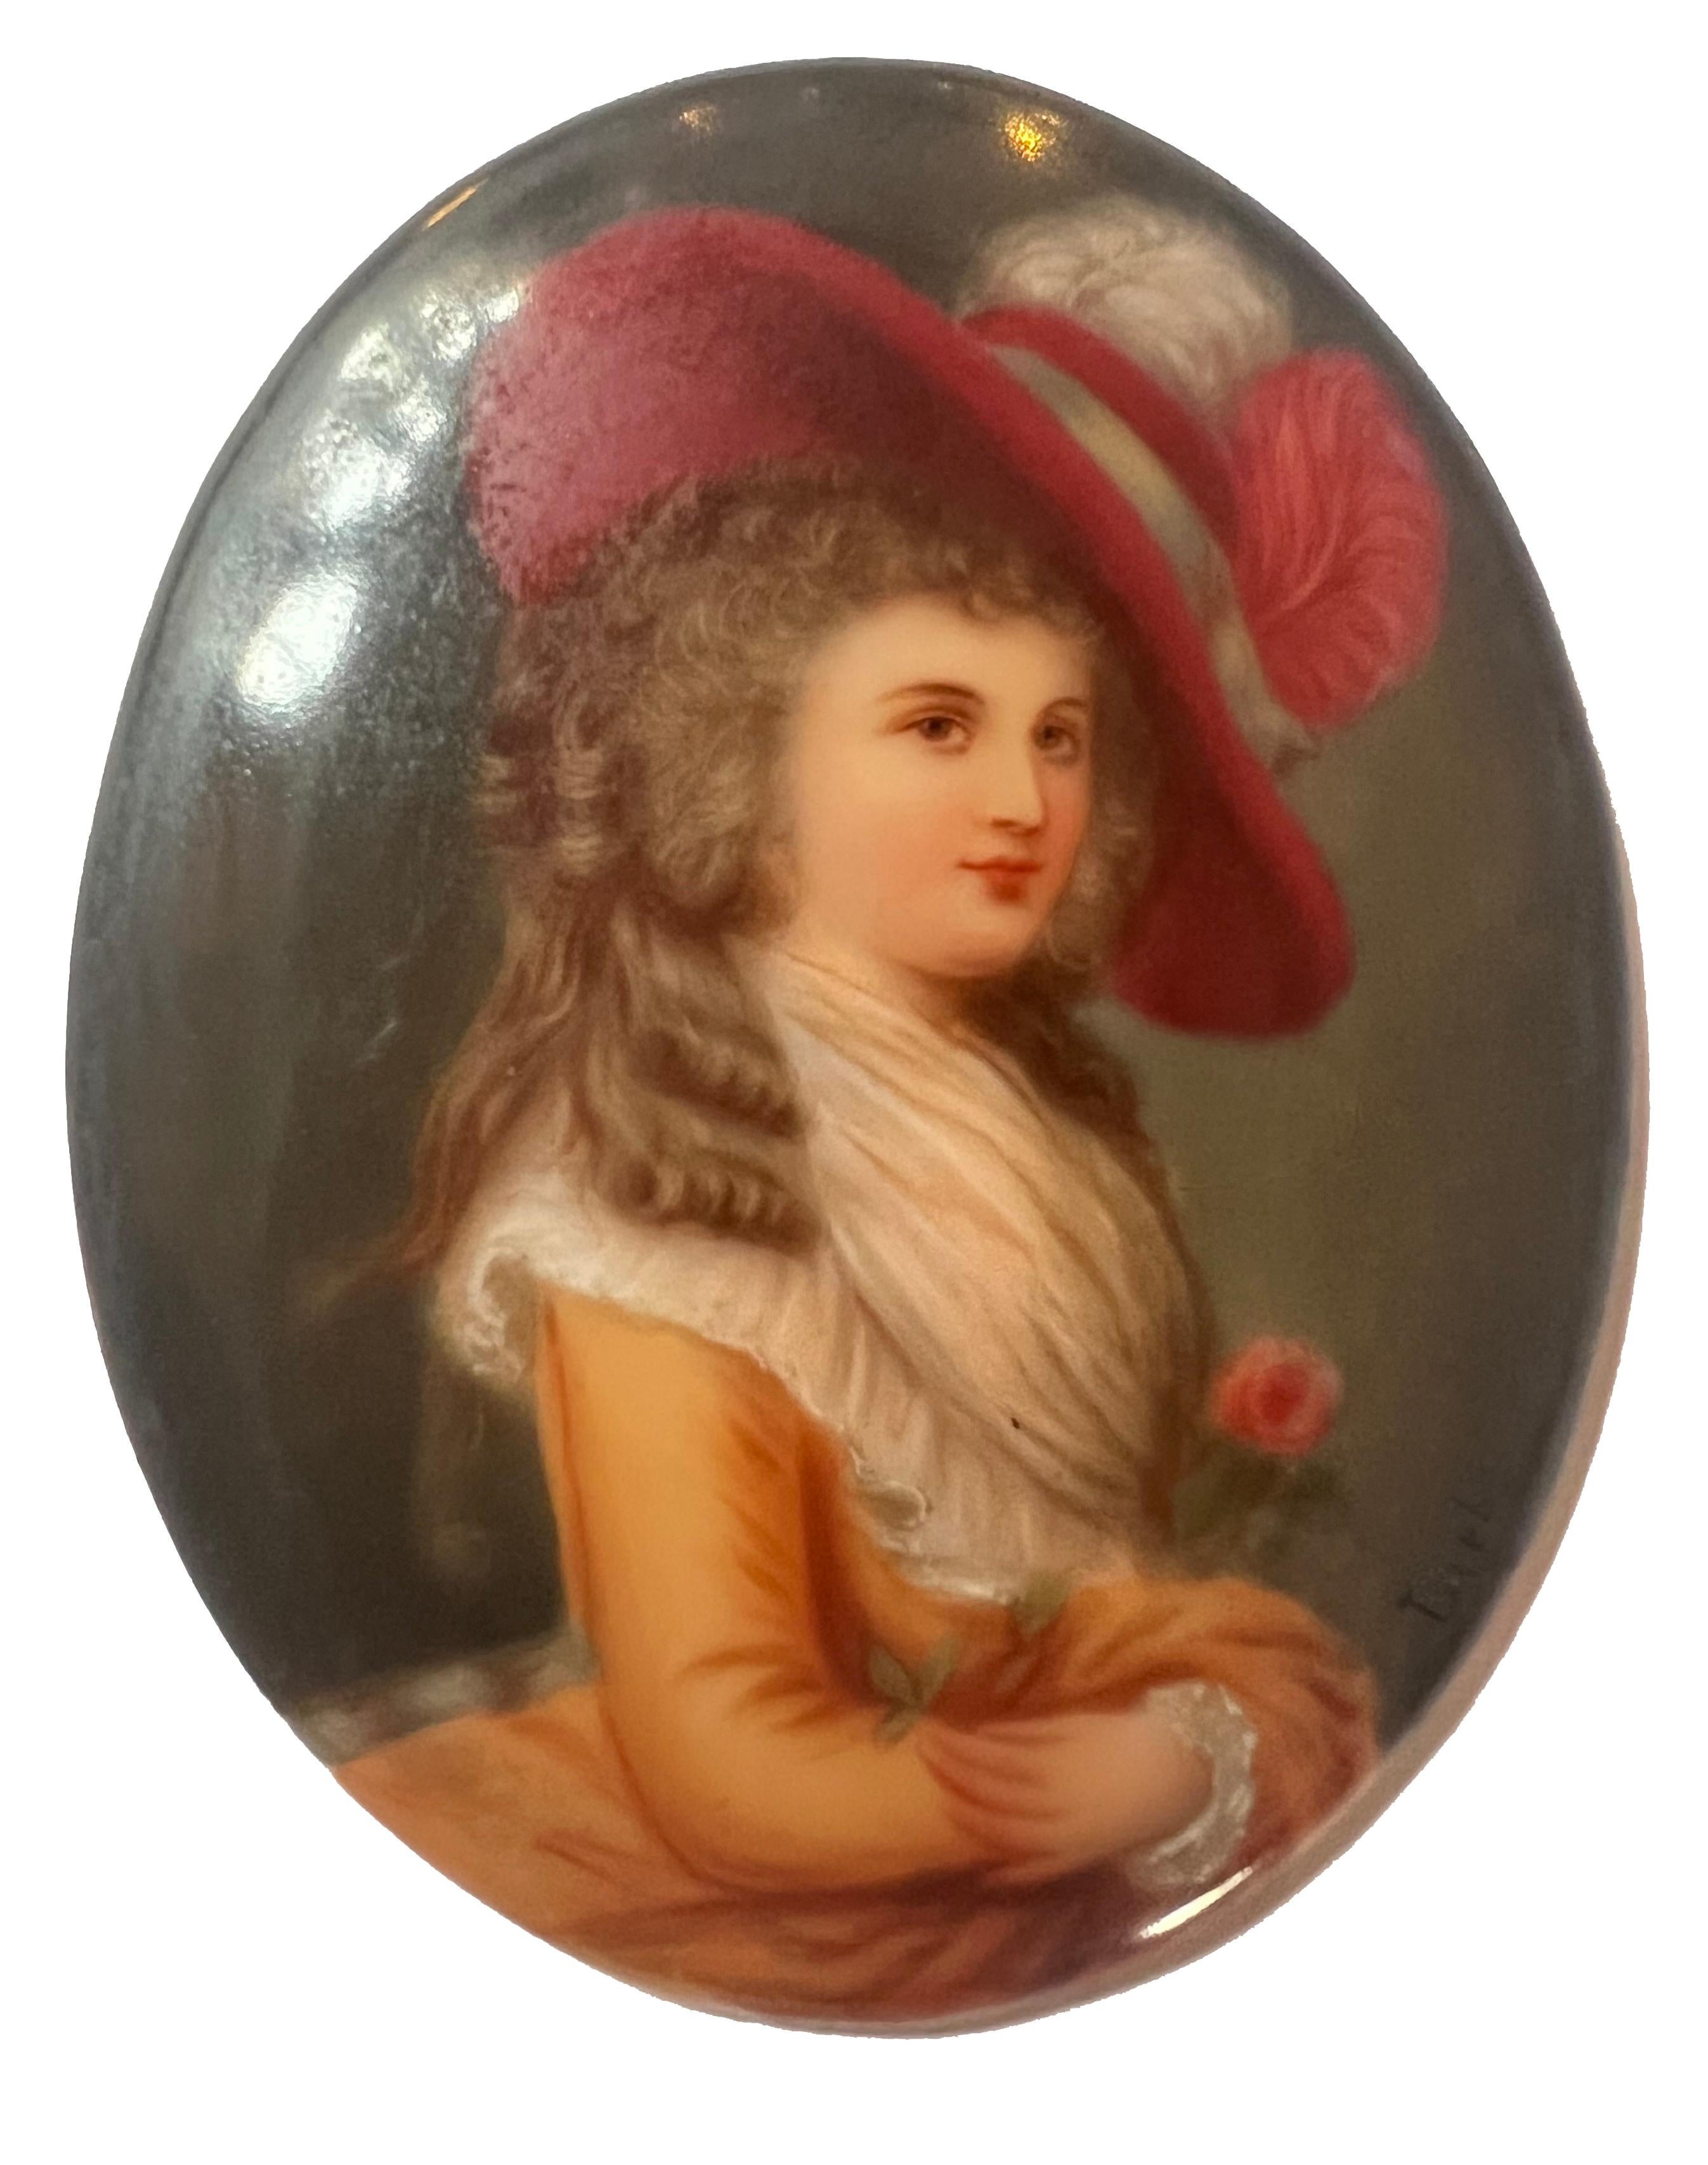 A very good quality early 19th Century Austrian, Vienna style convex porcelain plaque depicting a hand painted portrait of the 